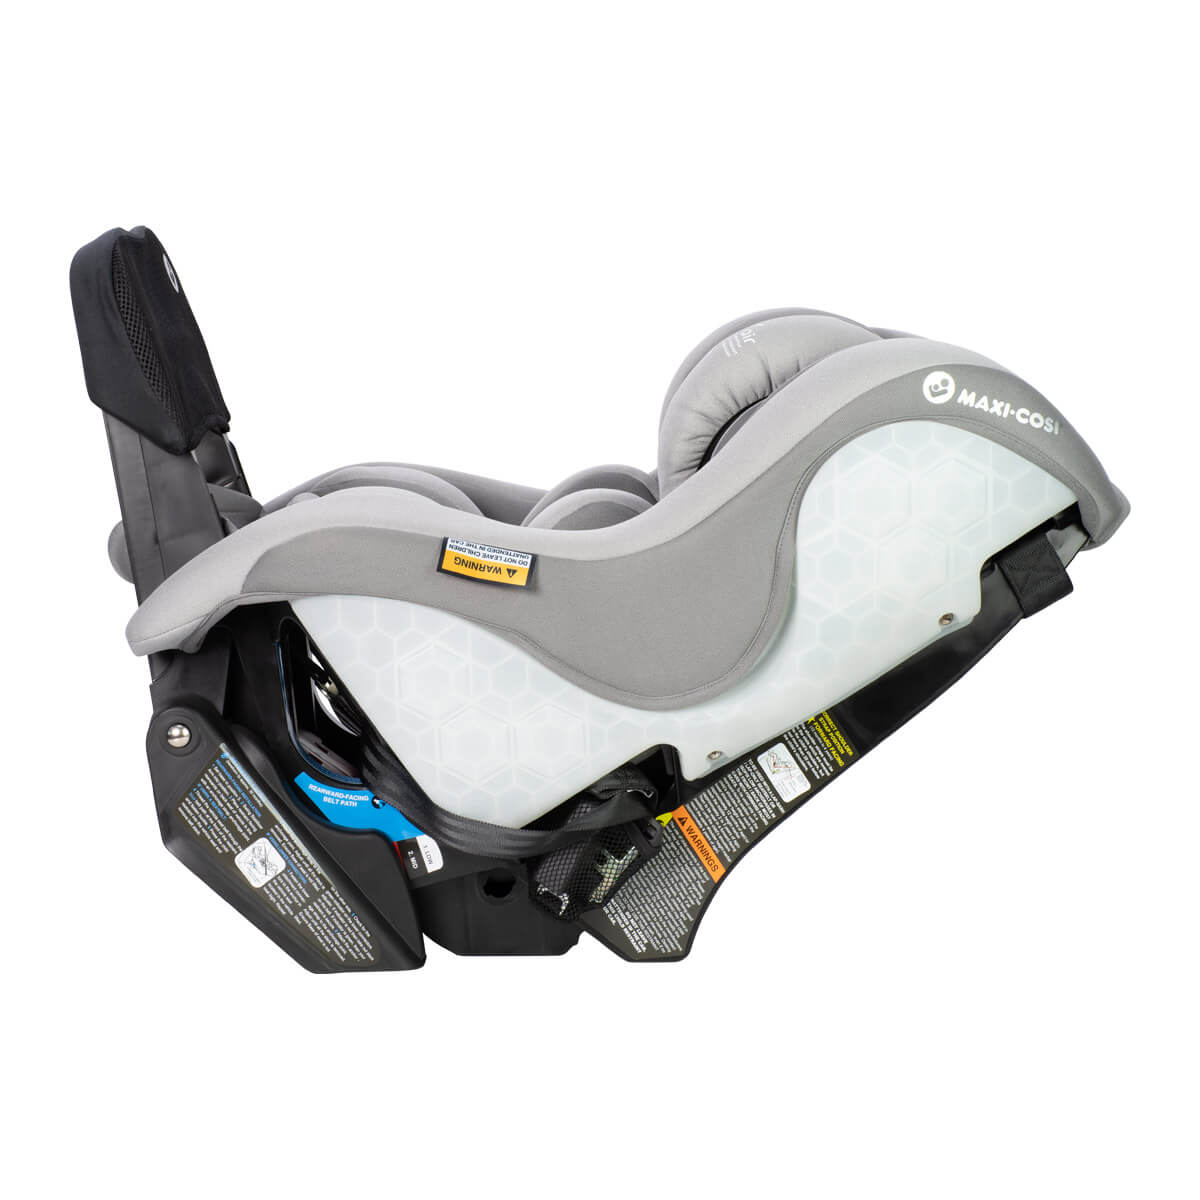 Maxi-Cosi Euro Nxt car seat in various reclined positions